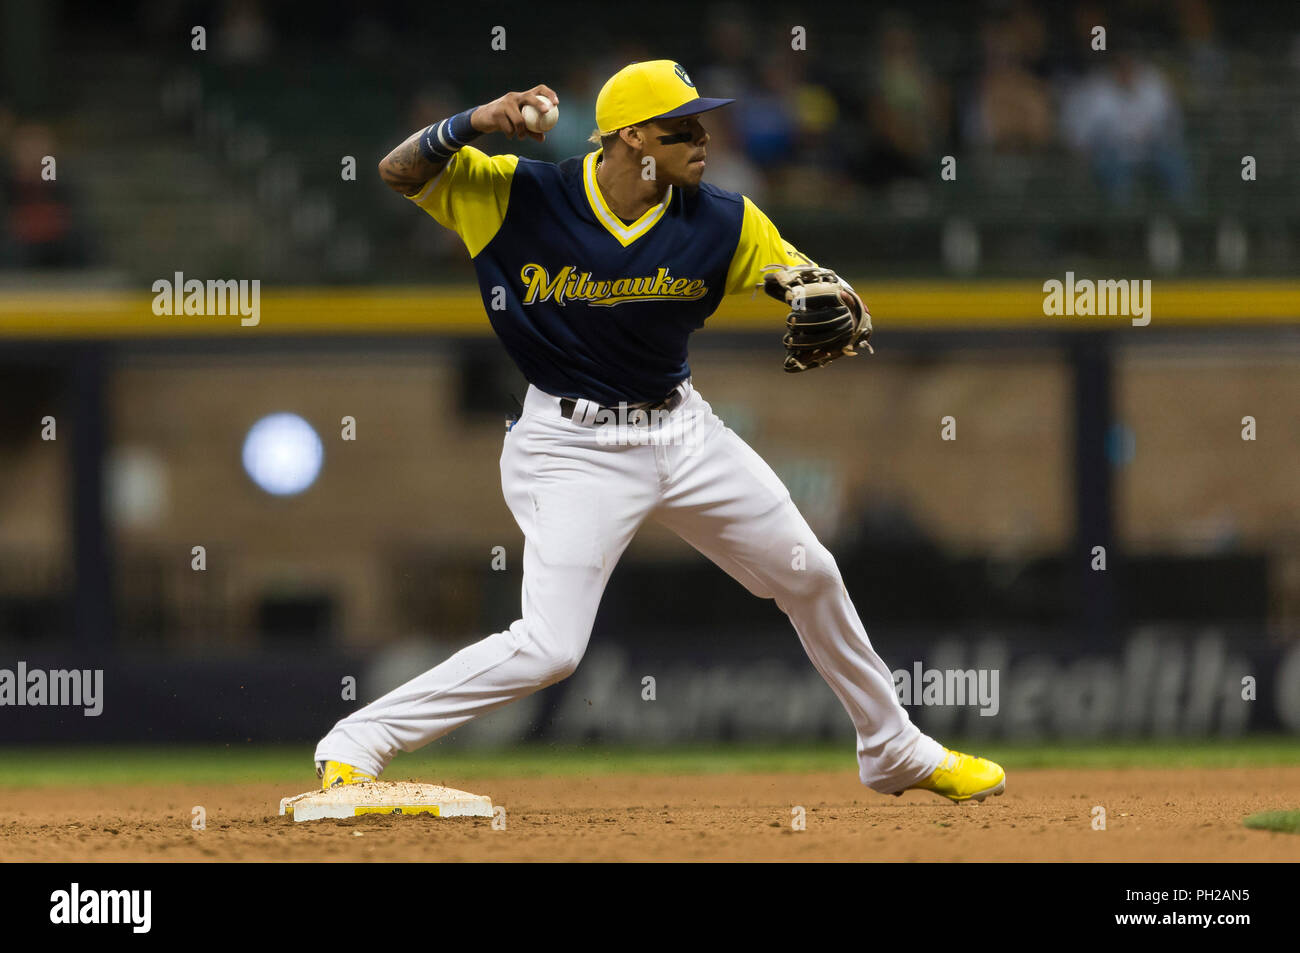 05 August 2016: Milwaukee Brewers Shortstop Orlando Arcia (3) gets his  first MLB hit and RBI single [10779] during a game between Milwaukee Brewers  and the Arizona Diamondbacks at Chase field. (Photo